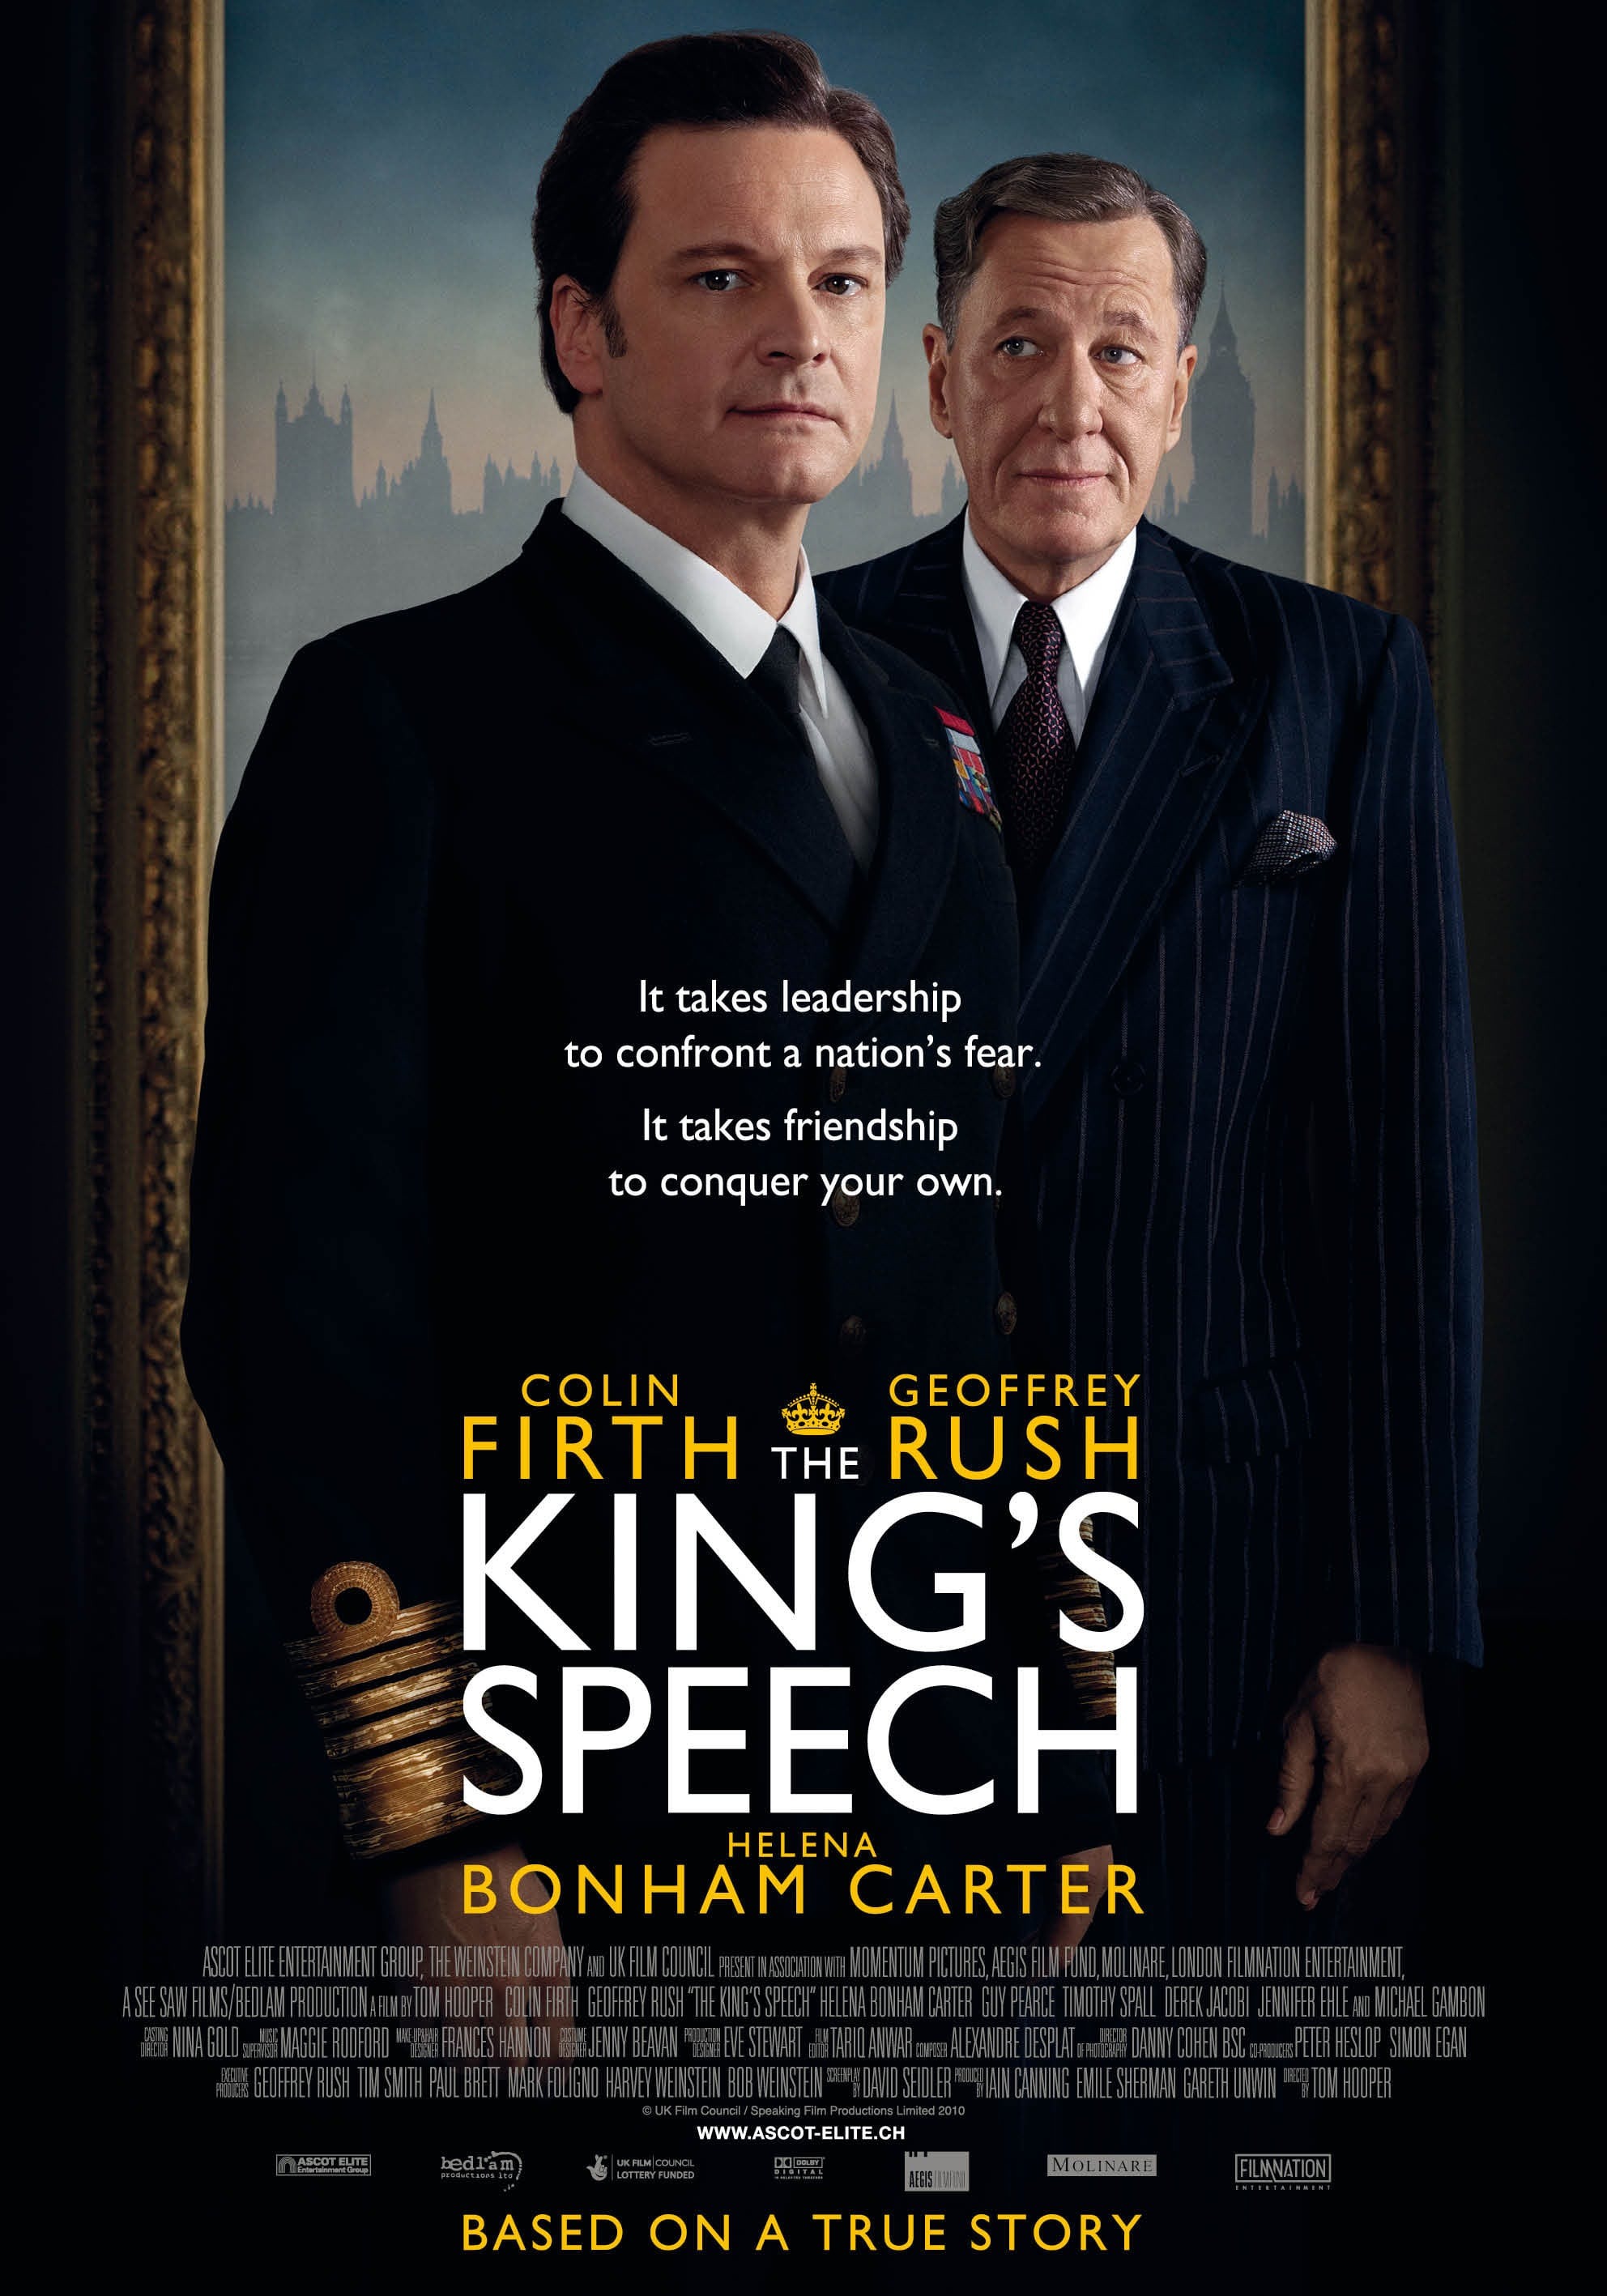 Mega Sized Movie Poster Image for The King's Speech (#13 of 13)